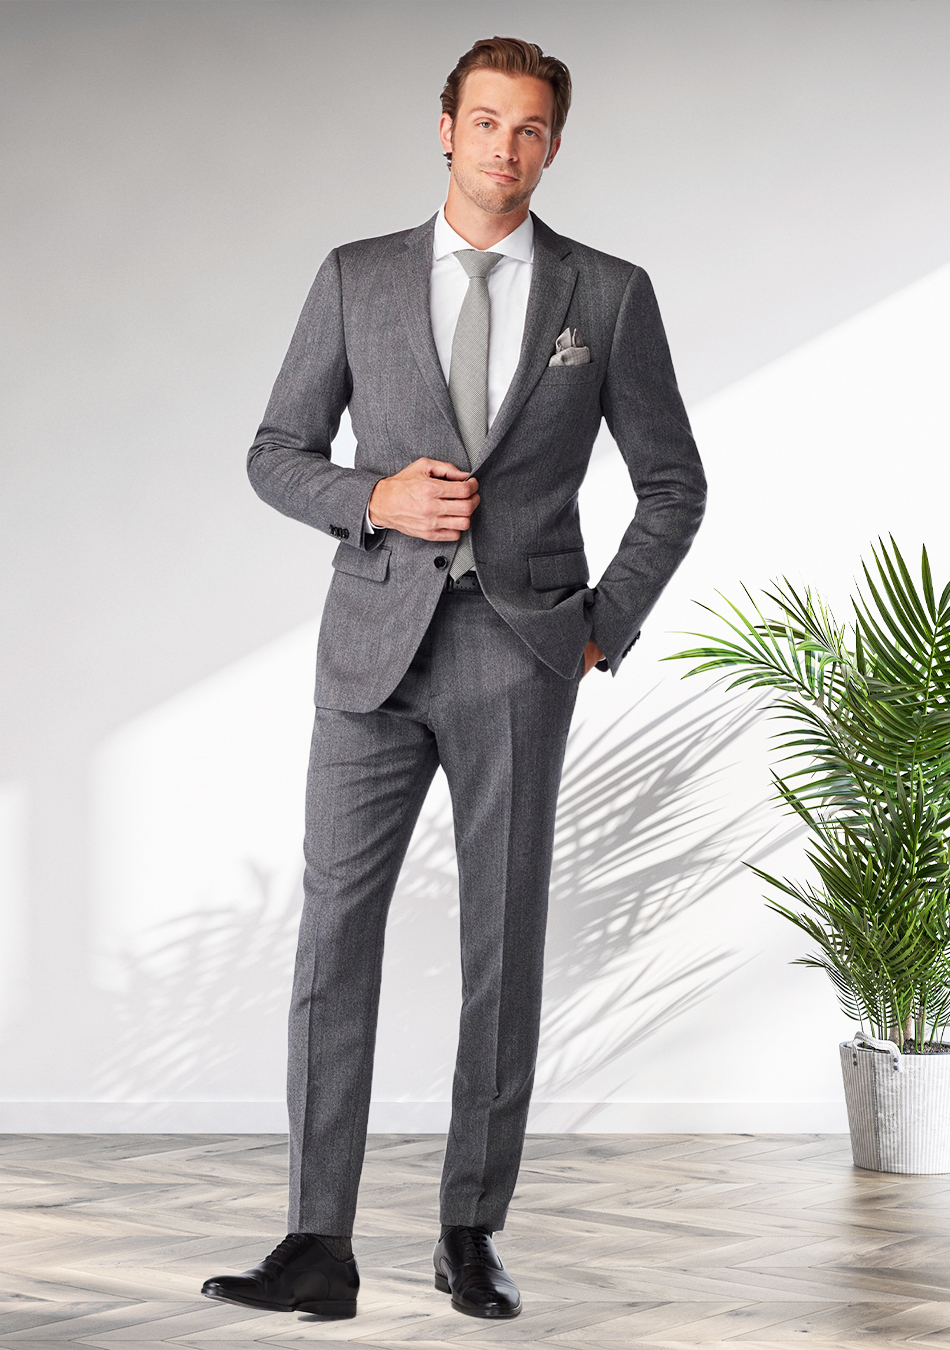 Grey suit, white dress shirt, grey tie, and black Oxford shoes